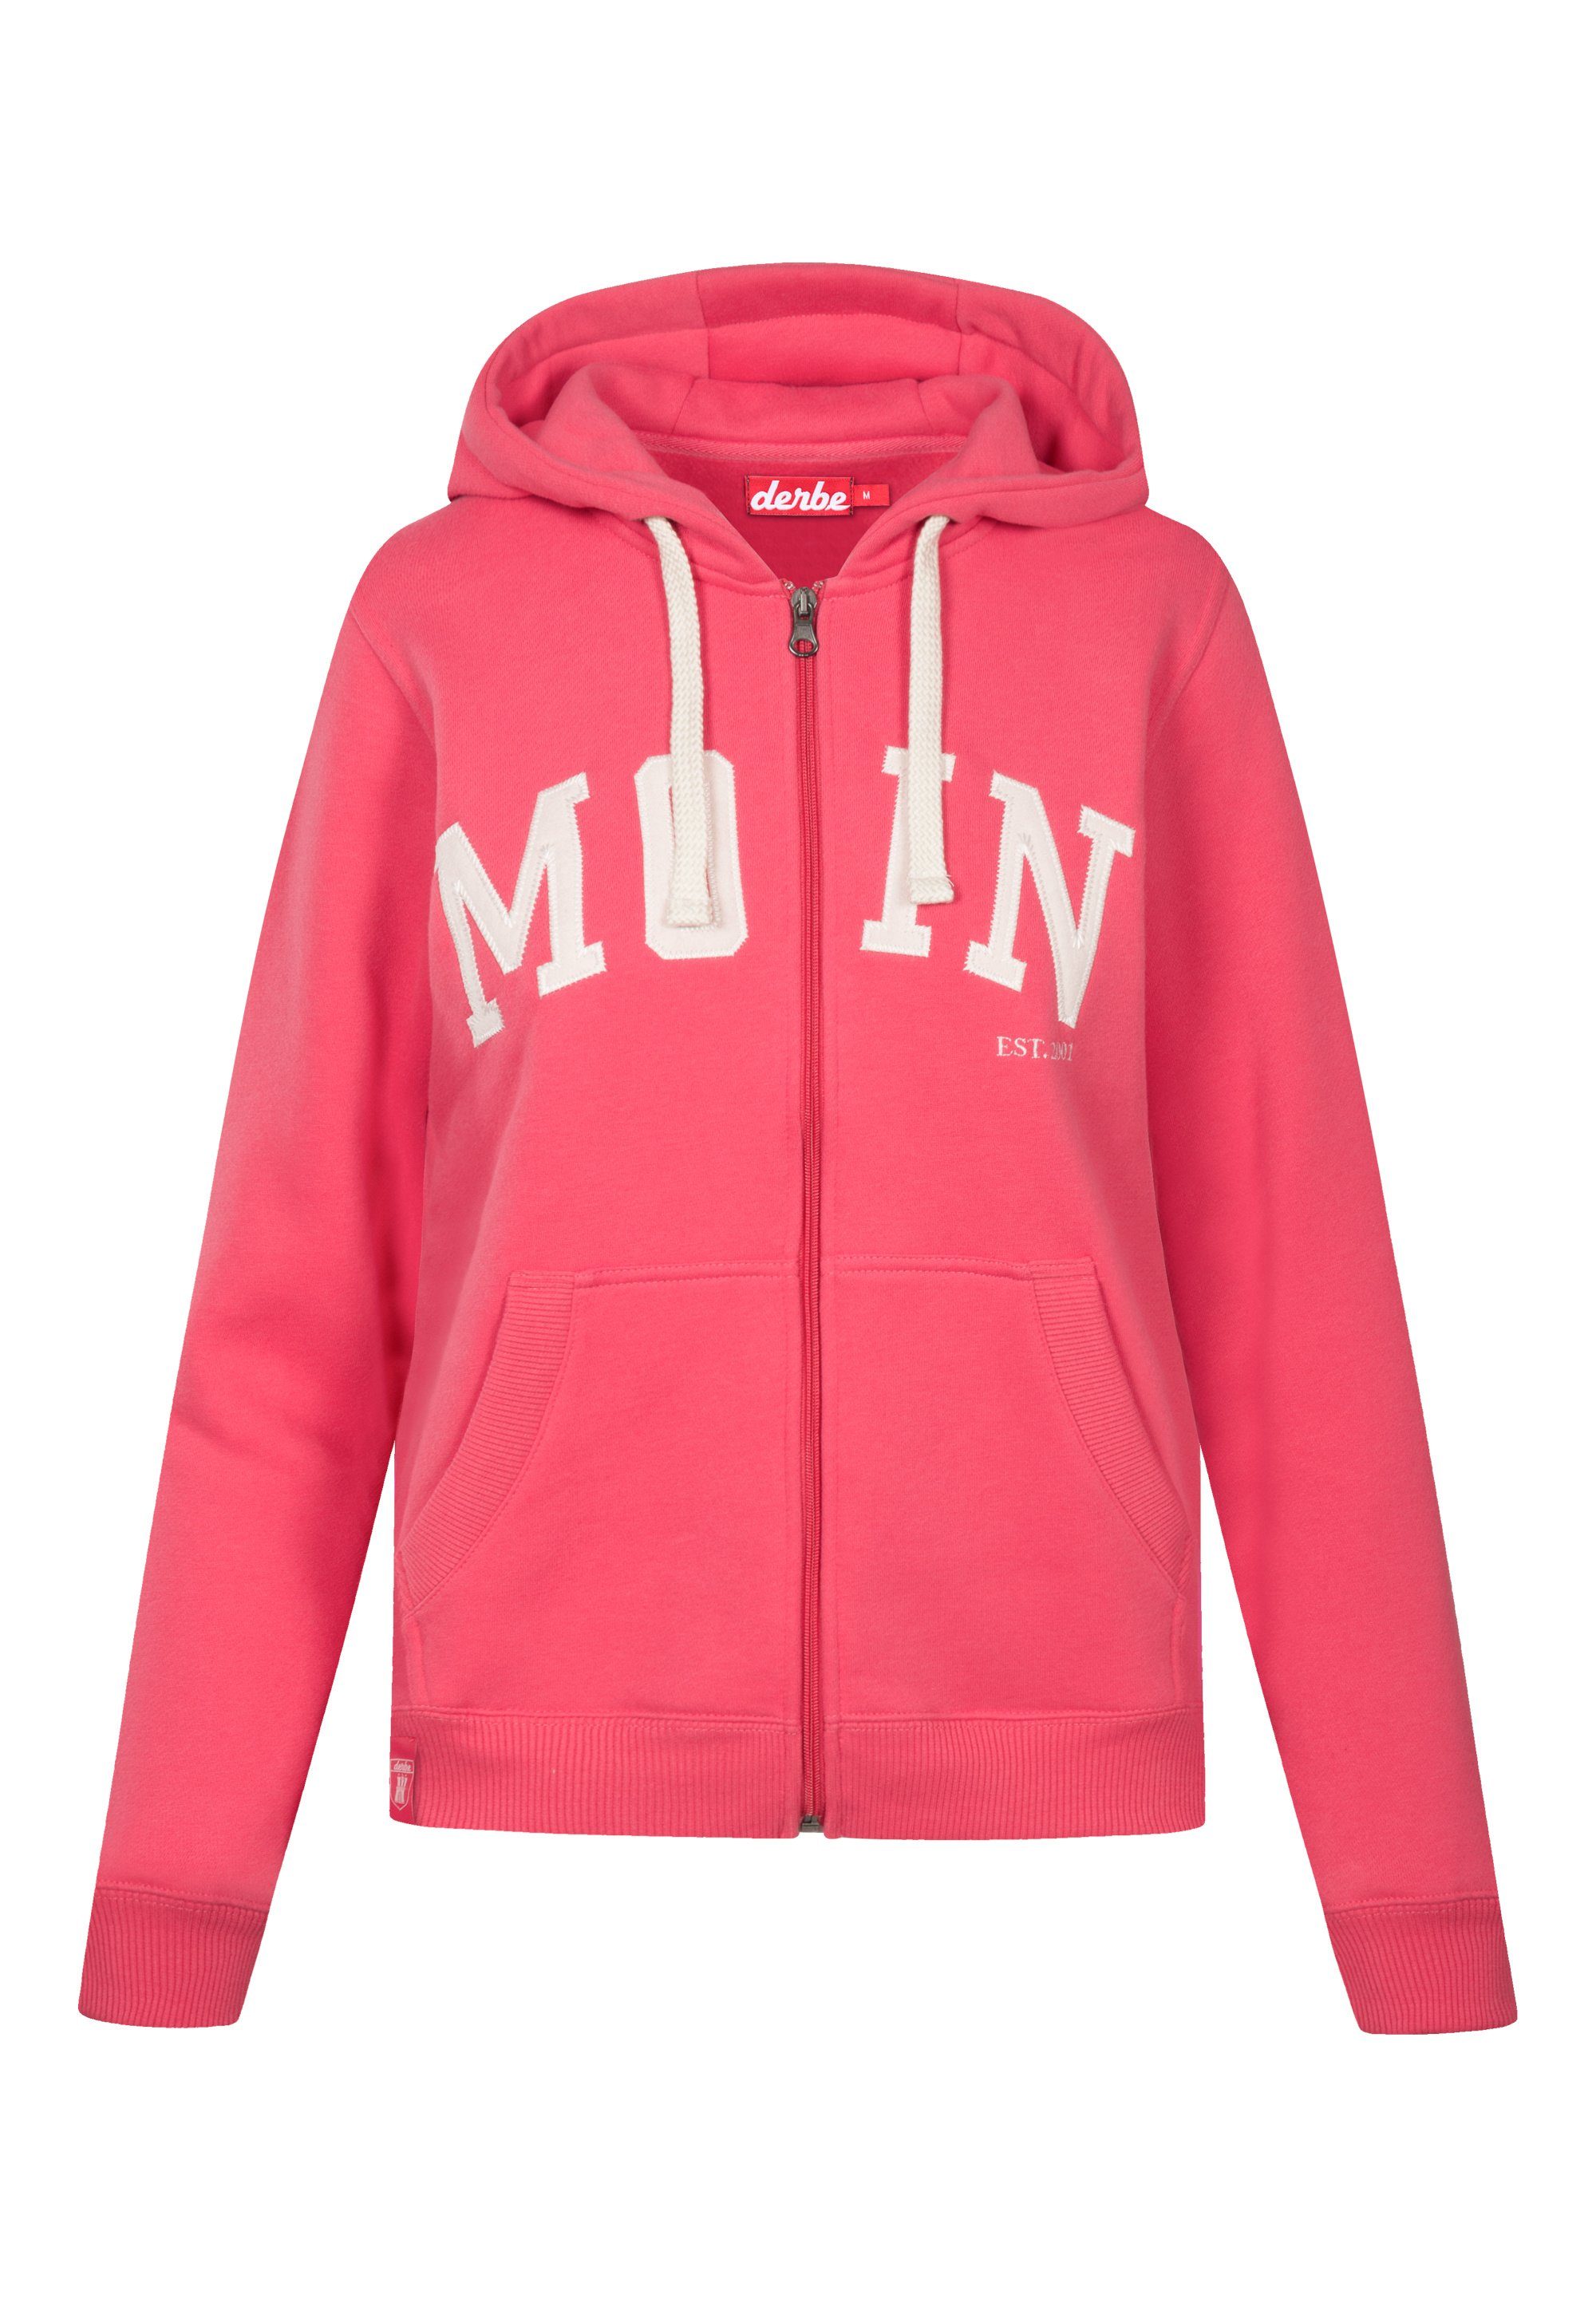 Derbe Sweatshirt MOIN Super weich, Made in Portugal paradise pink